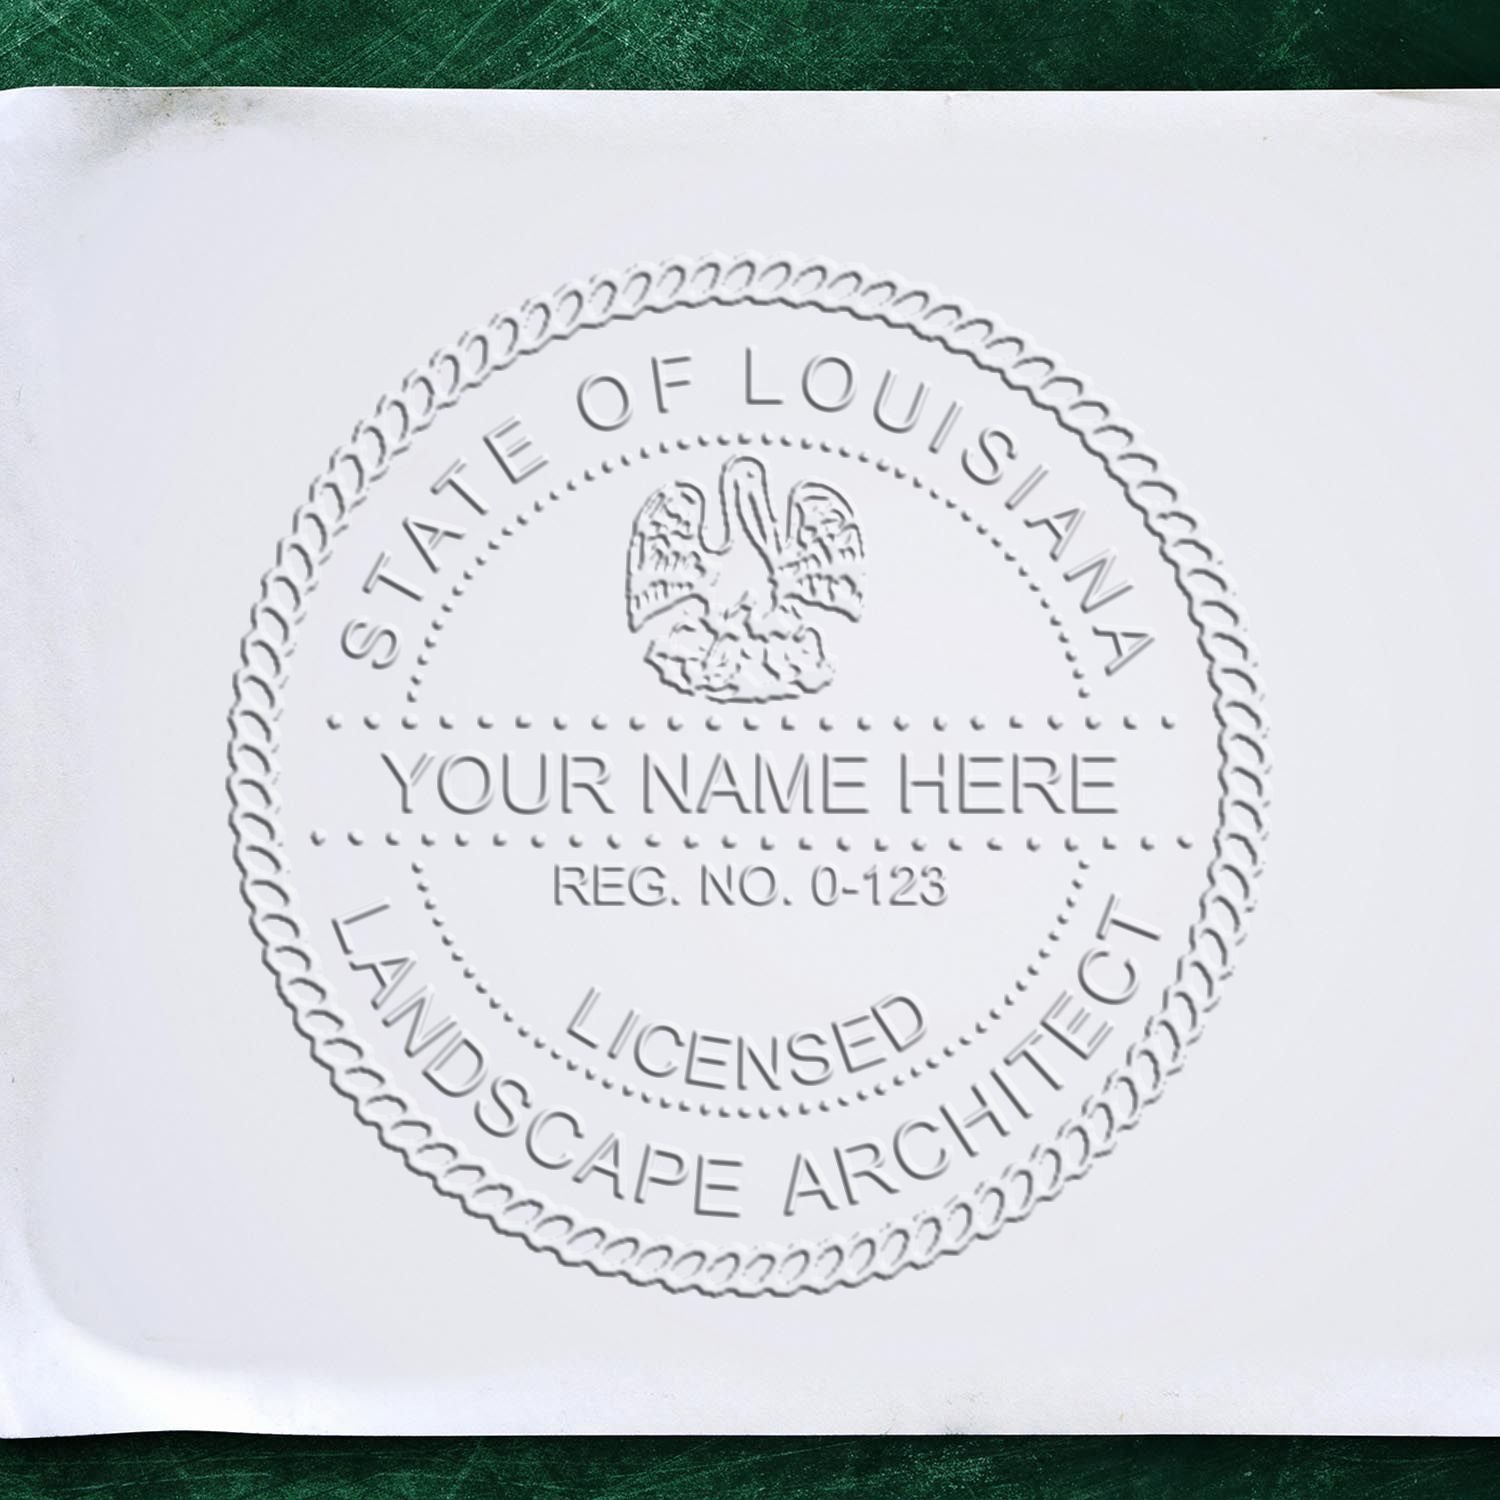 A photograph of the Hybrid Louisiana Landscape Architect Seal stamp impression reveals a vivid, professional image of the on paper.